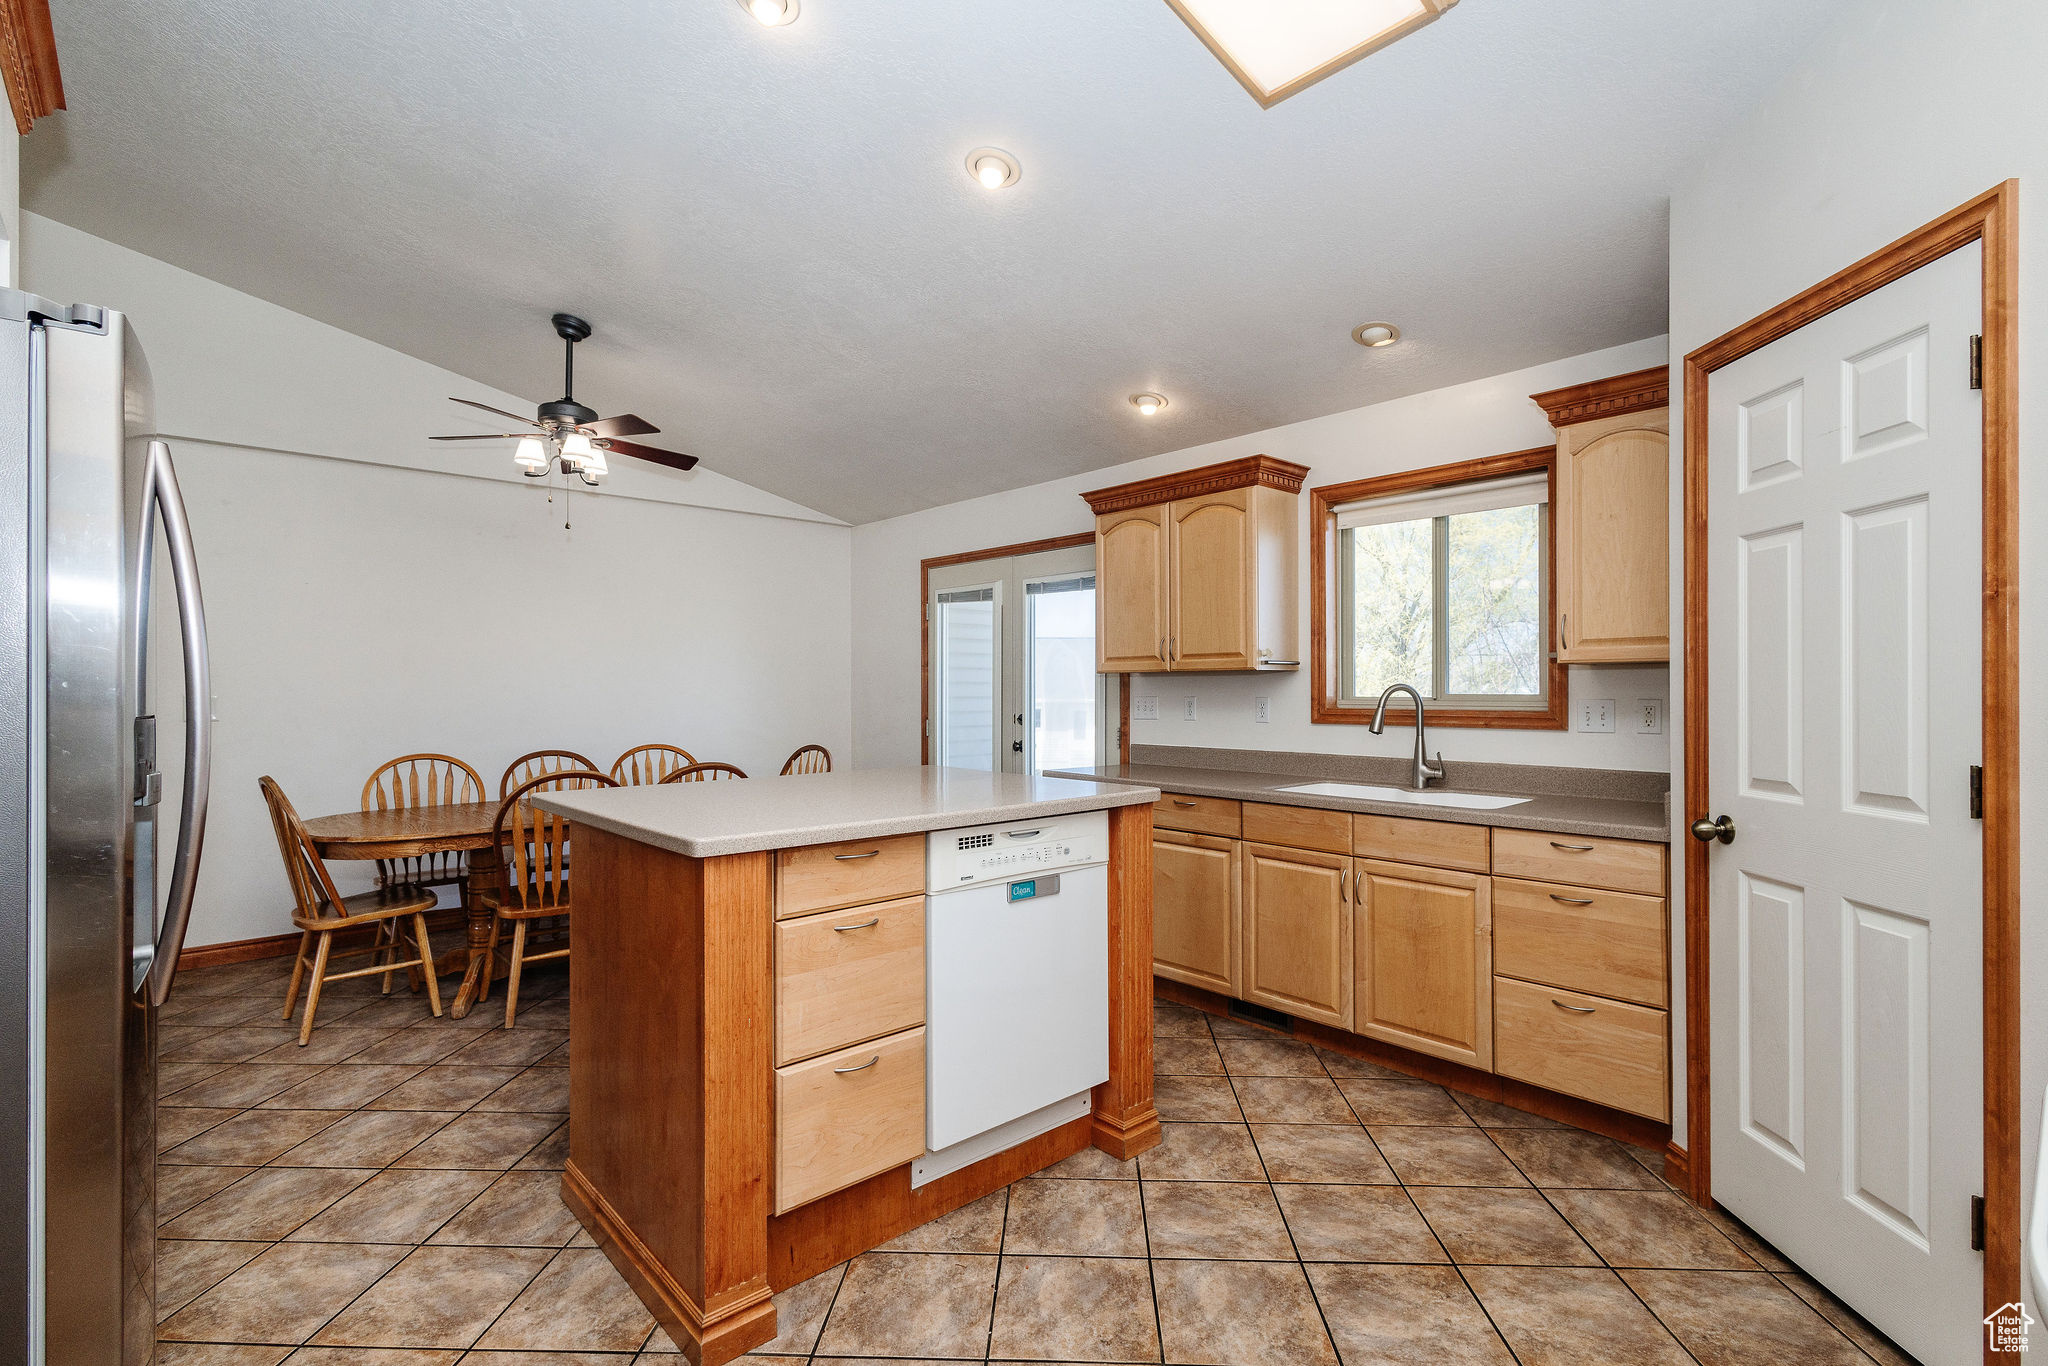 Kitchen with ceiling fan, light tile floors, dishwasher, stainless steel fridge with ice dispenser, and vaulted ceiling